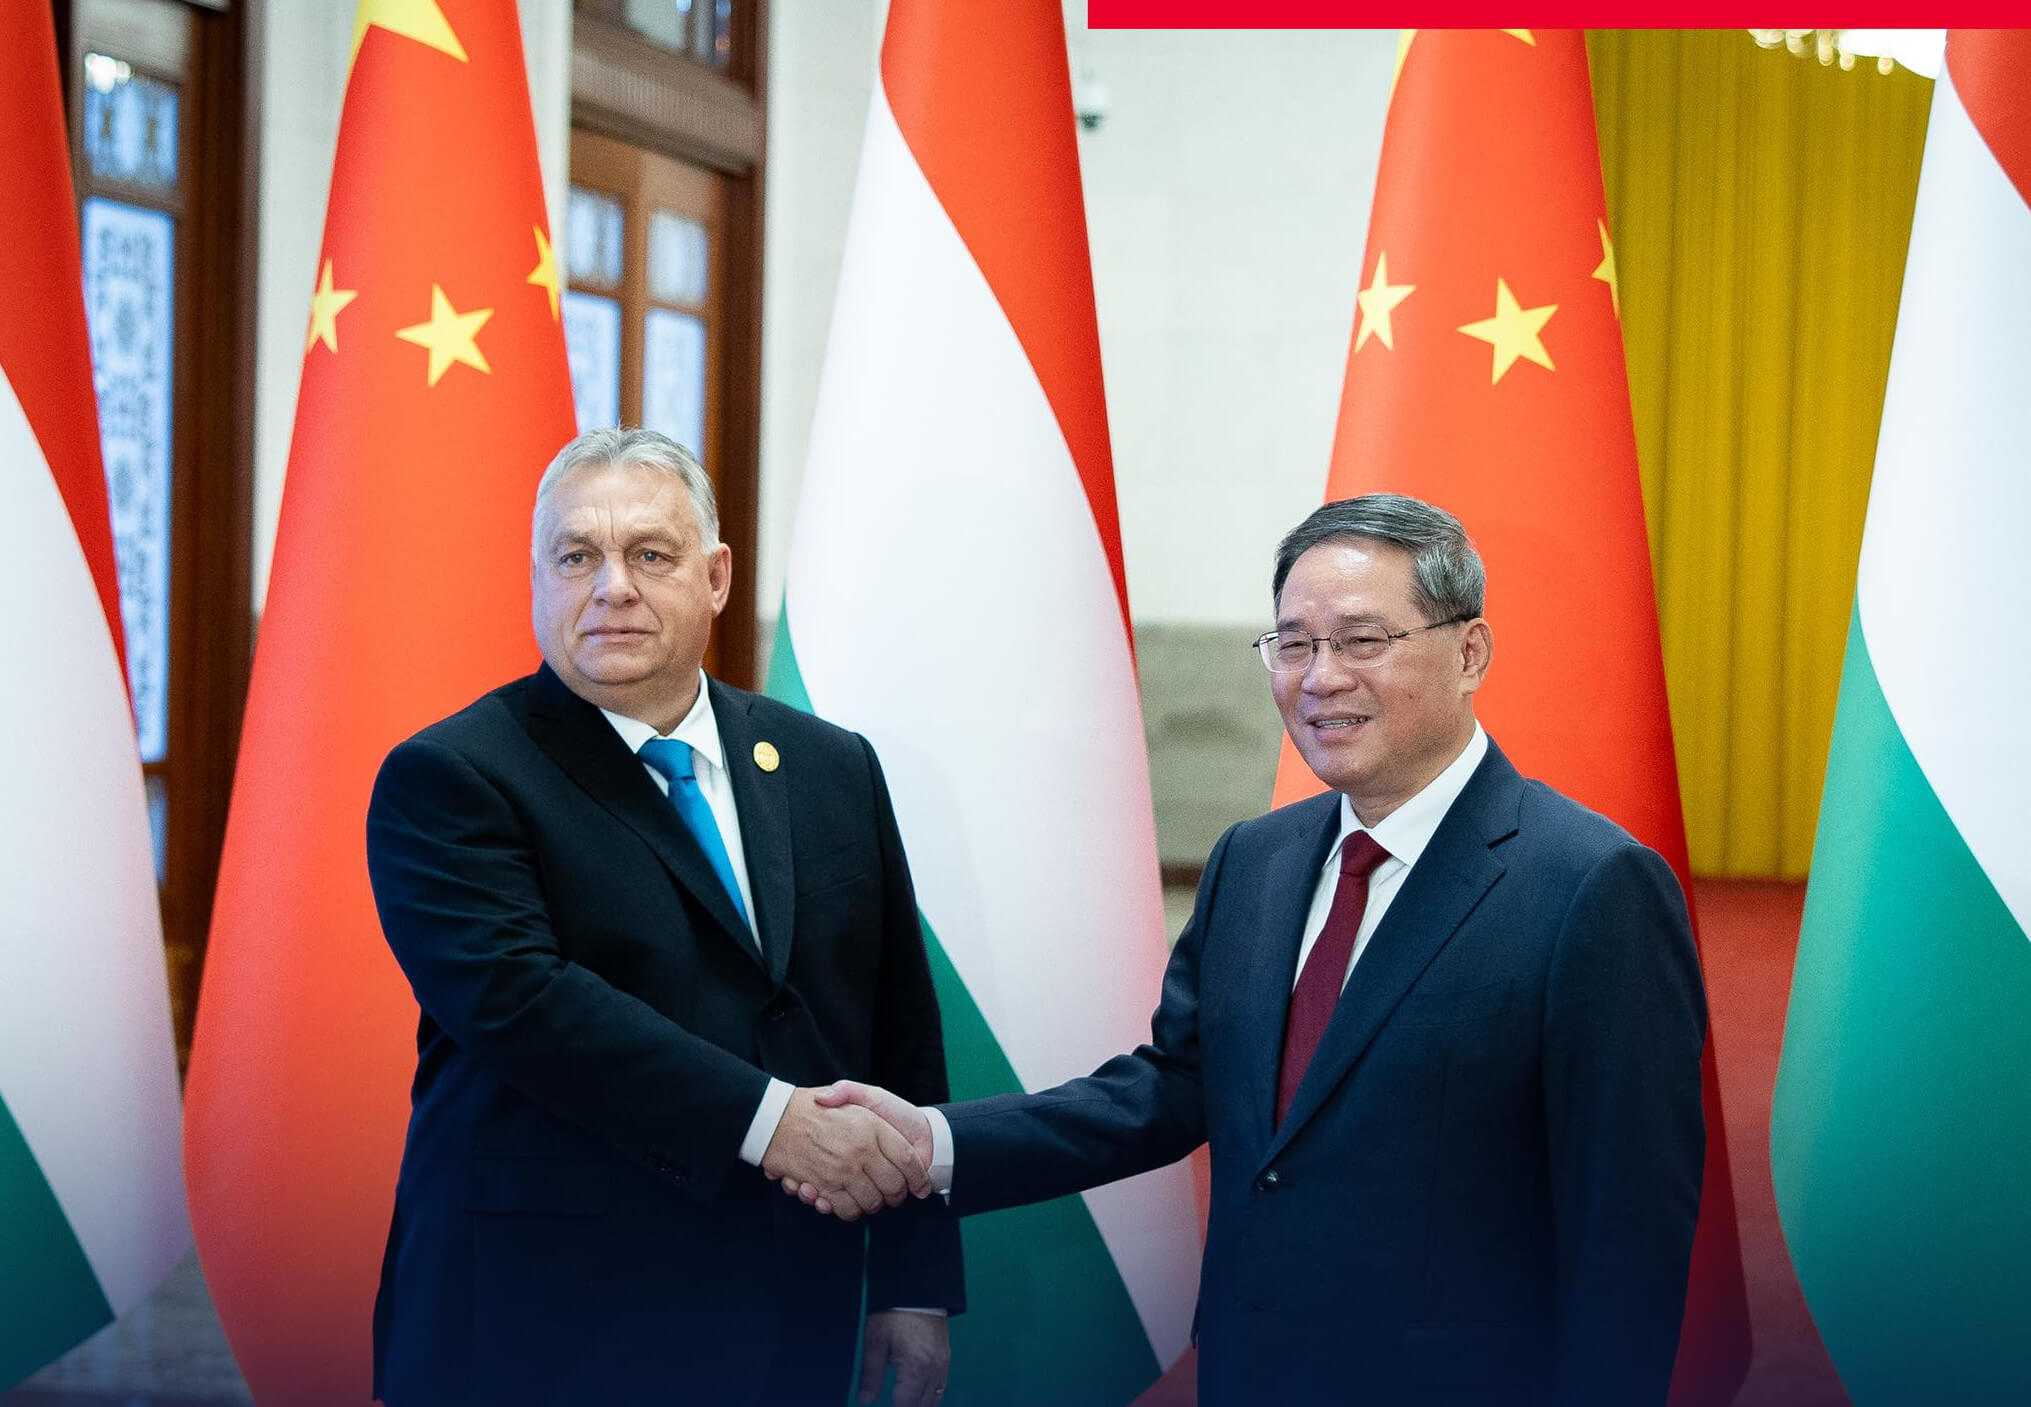 Orbán Visits Beijing: China is Hungary’s Largest Foreign Direct Investor, Ninth Top Trading Partner